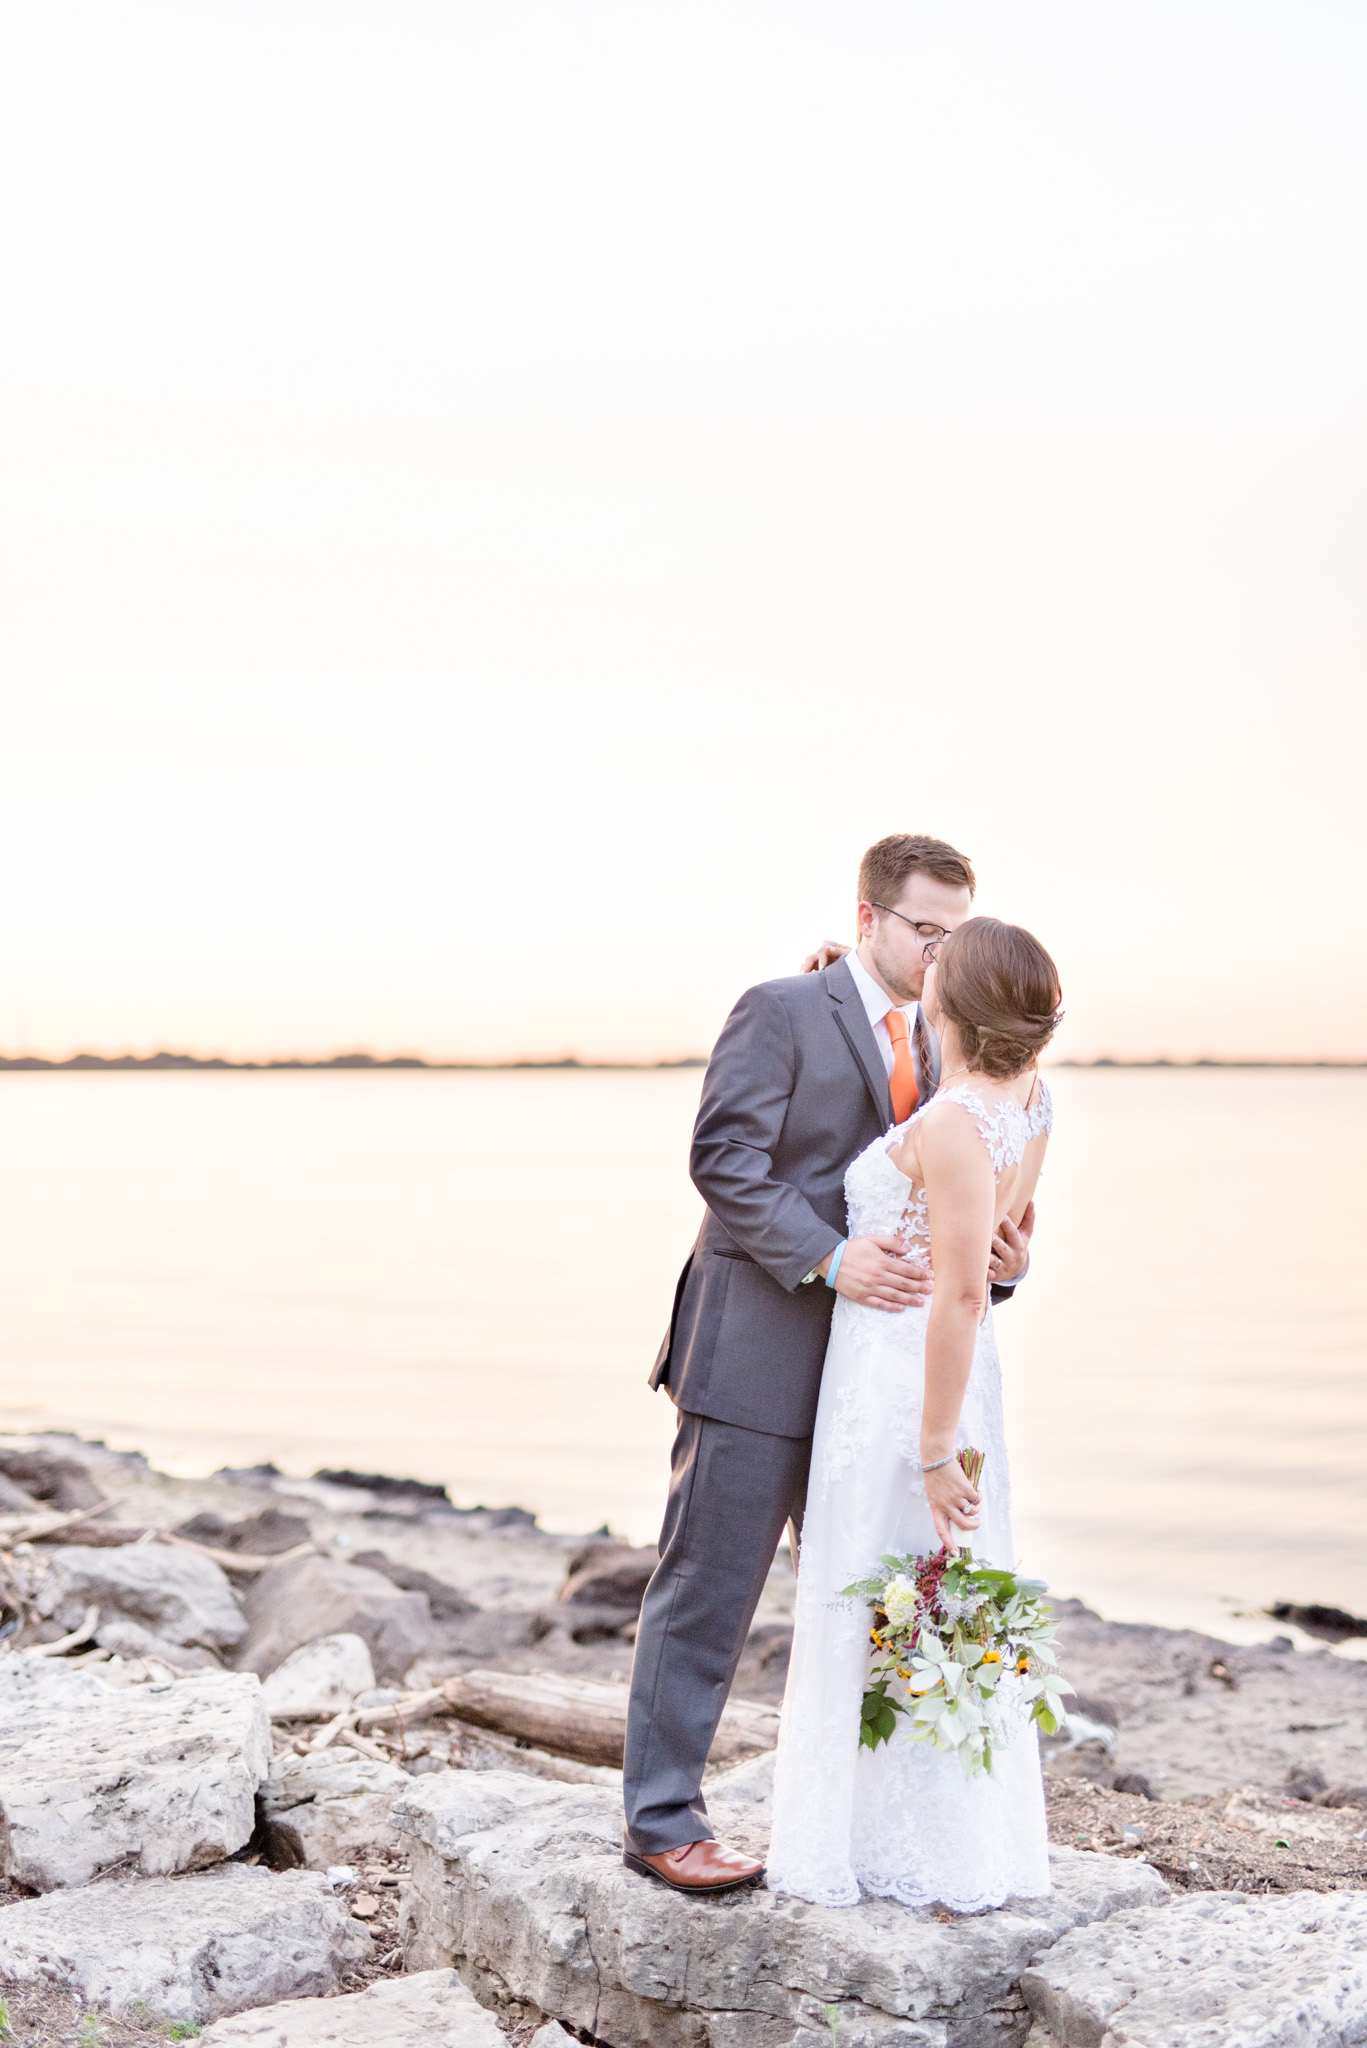 Bride and groom kiss by lake at sunset.